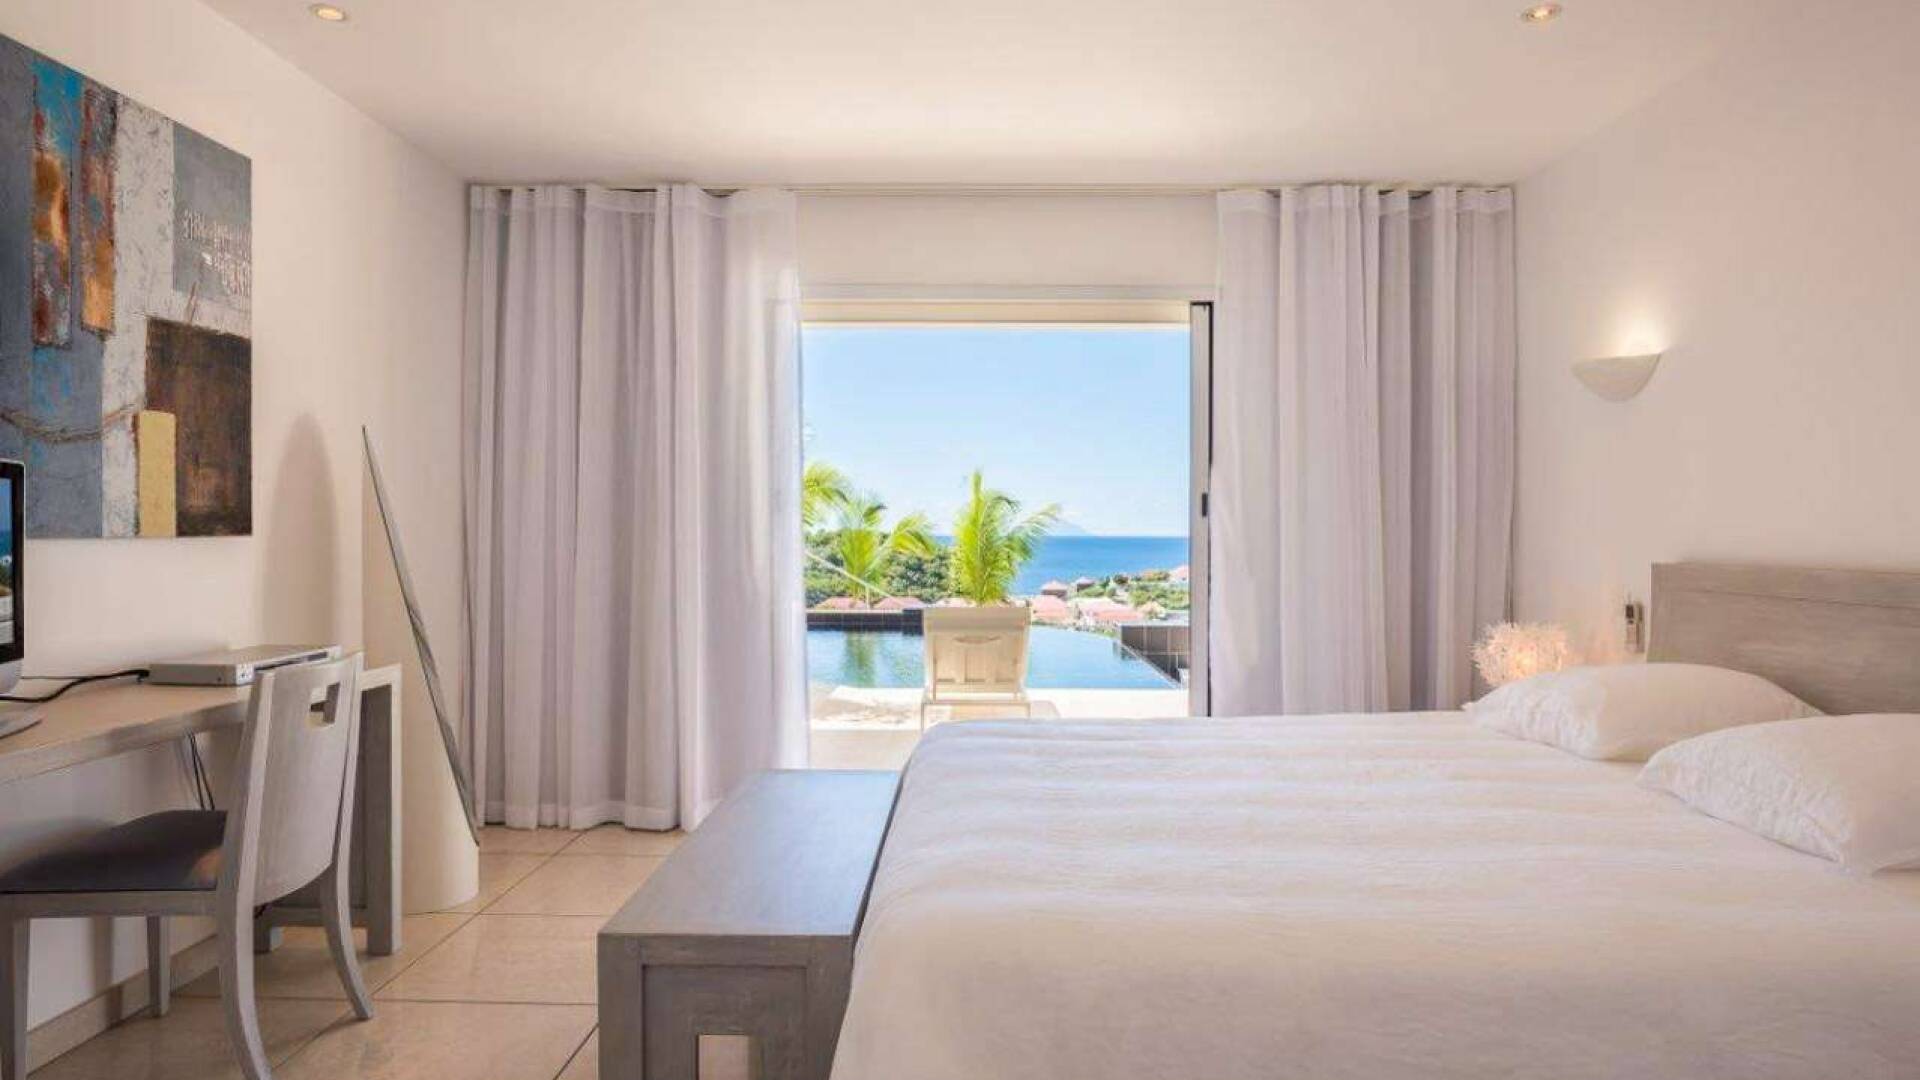 Bedroom at WV PRE, Gustavia, St. Barthelemy